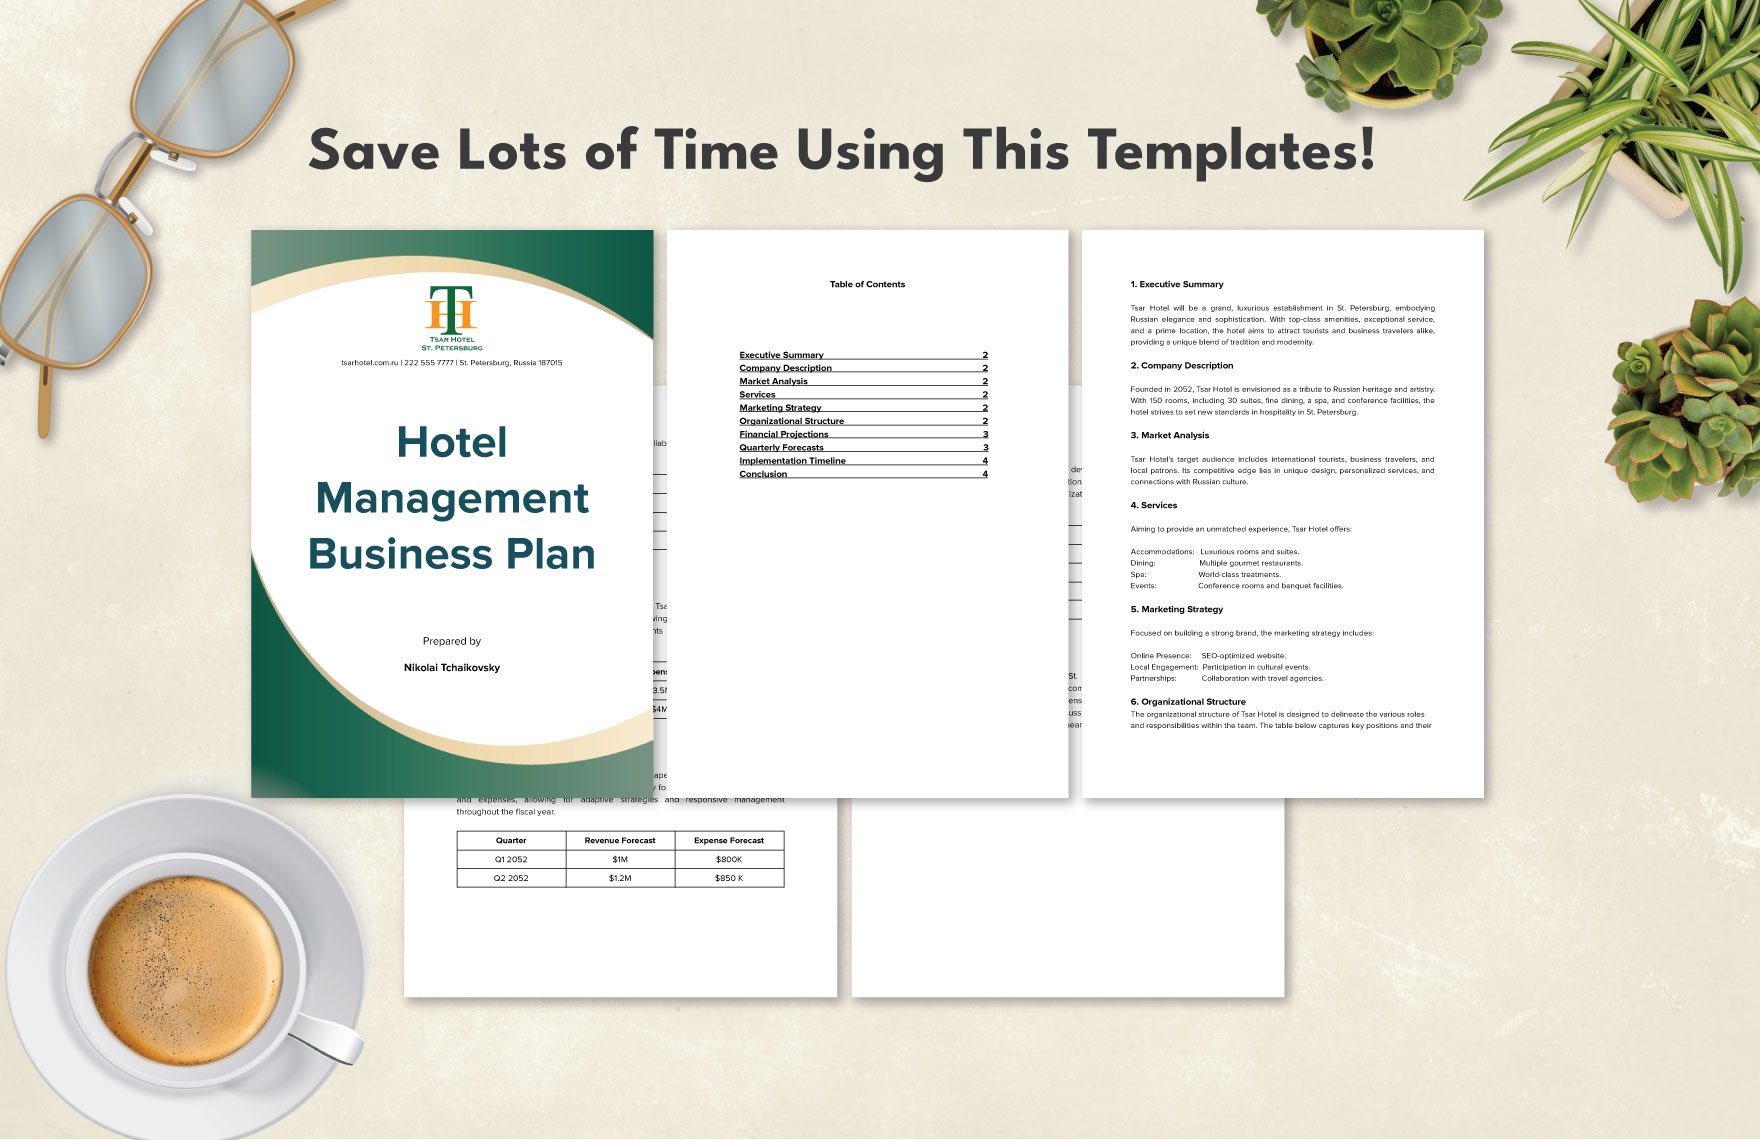 Business Plan of a Hotel Management In Saint Petersburg Template